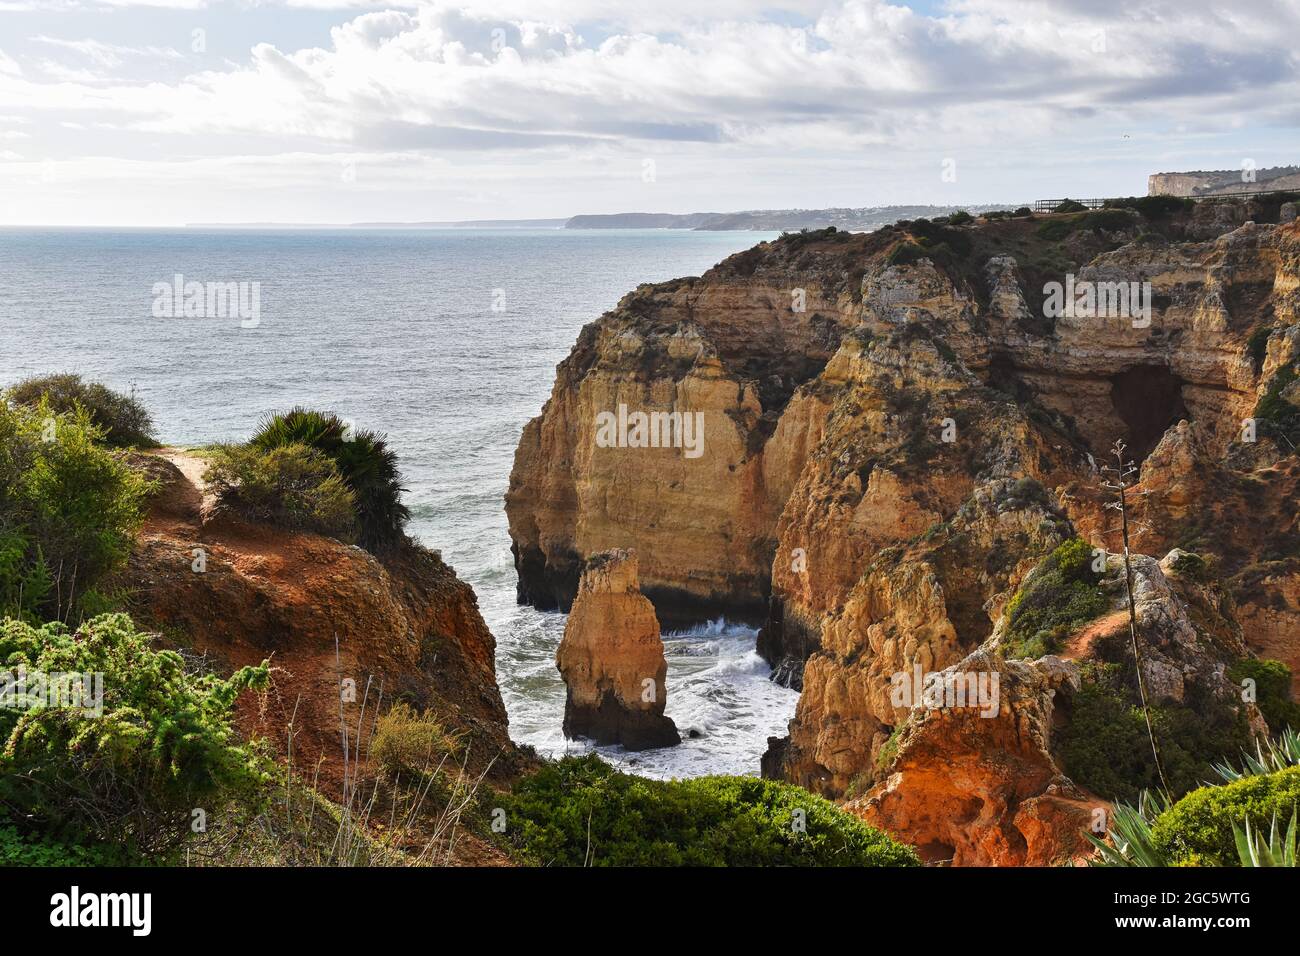 Sea view from the cliffs in Algarve, Portugal Stock Photo